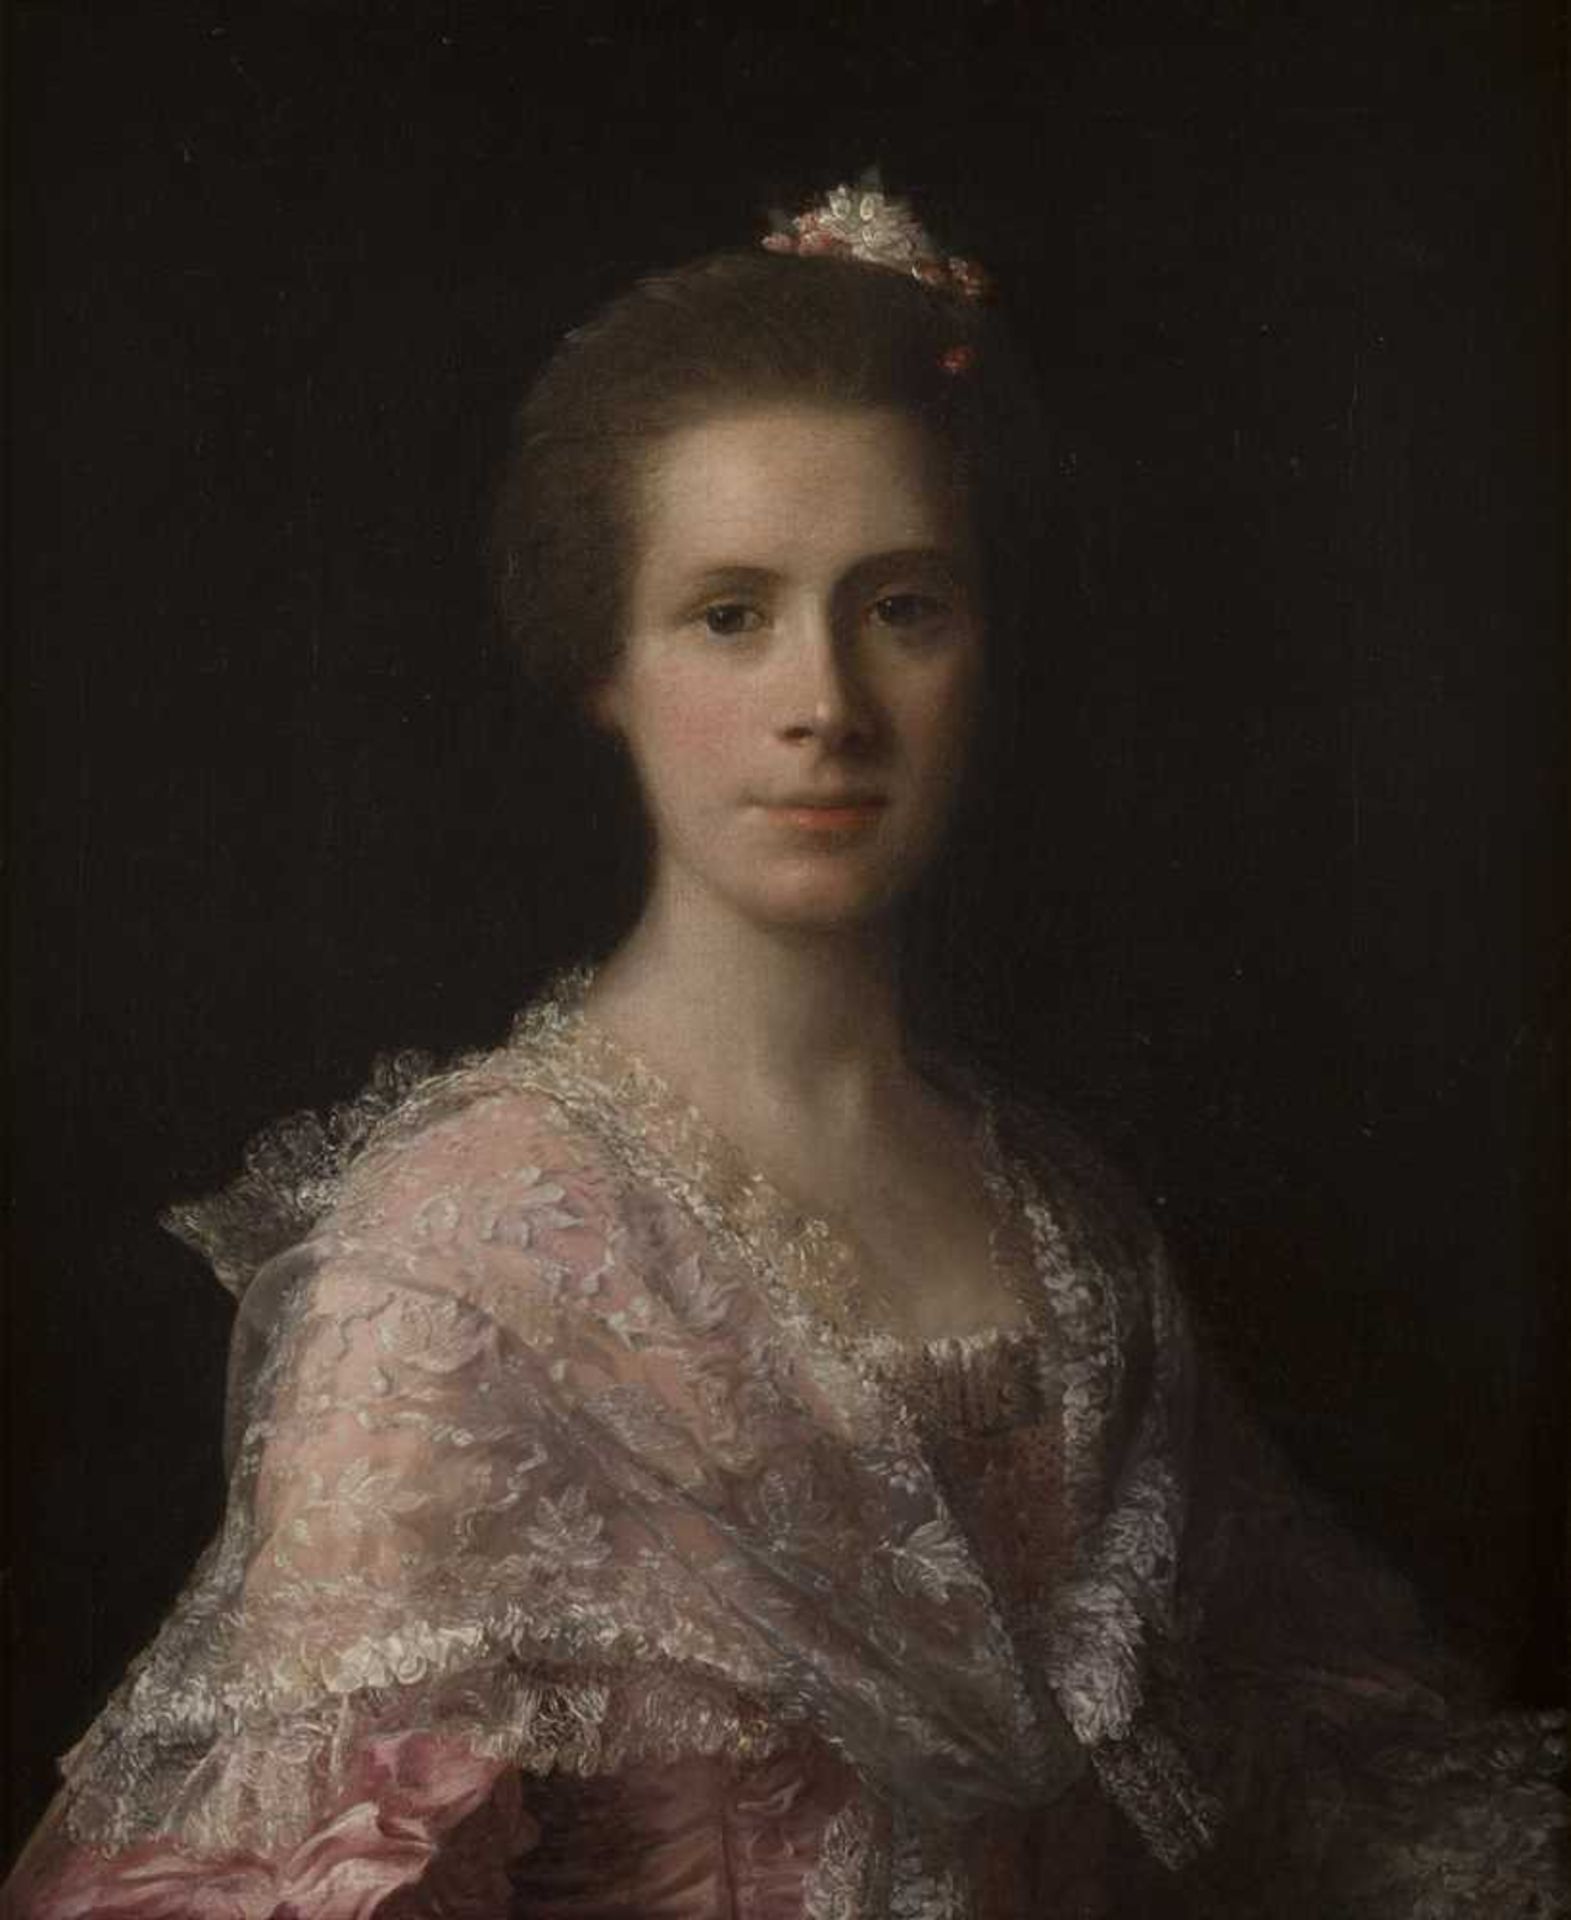 ATTRIBUTED TO ALLAN RAMSAY HALF LENGTH PORTRAIT OF MARGARET MITCHELSON, LADY SWINTON